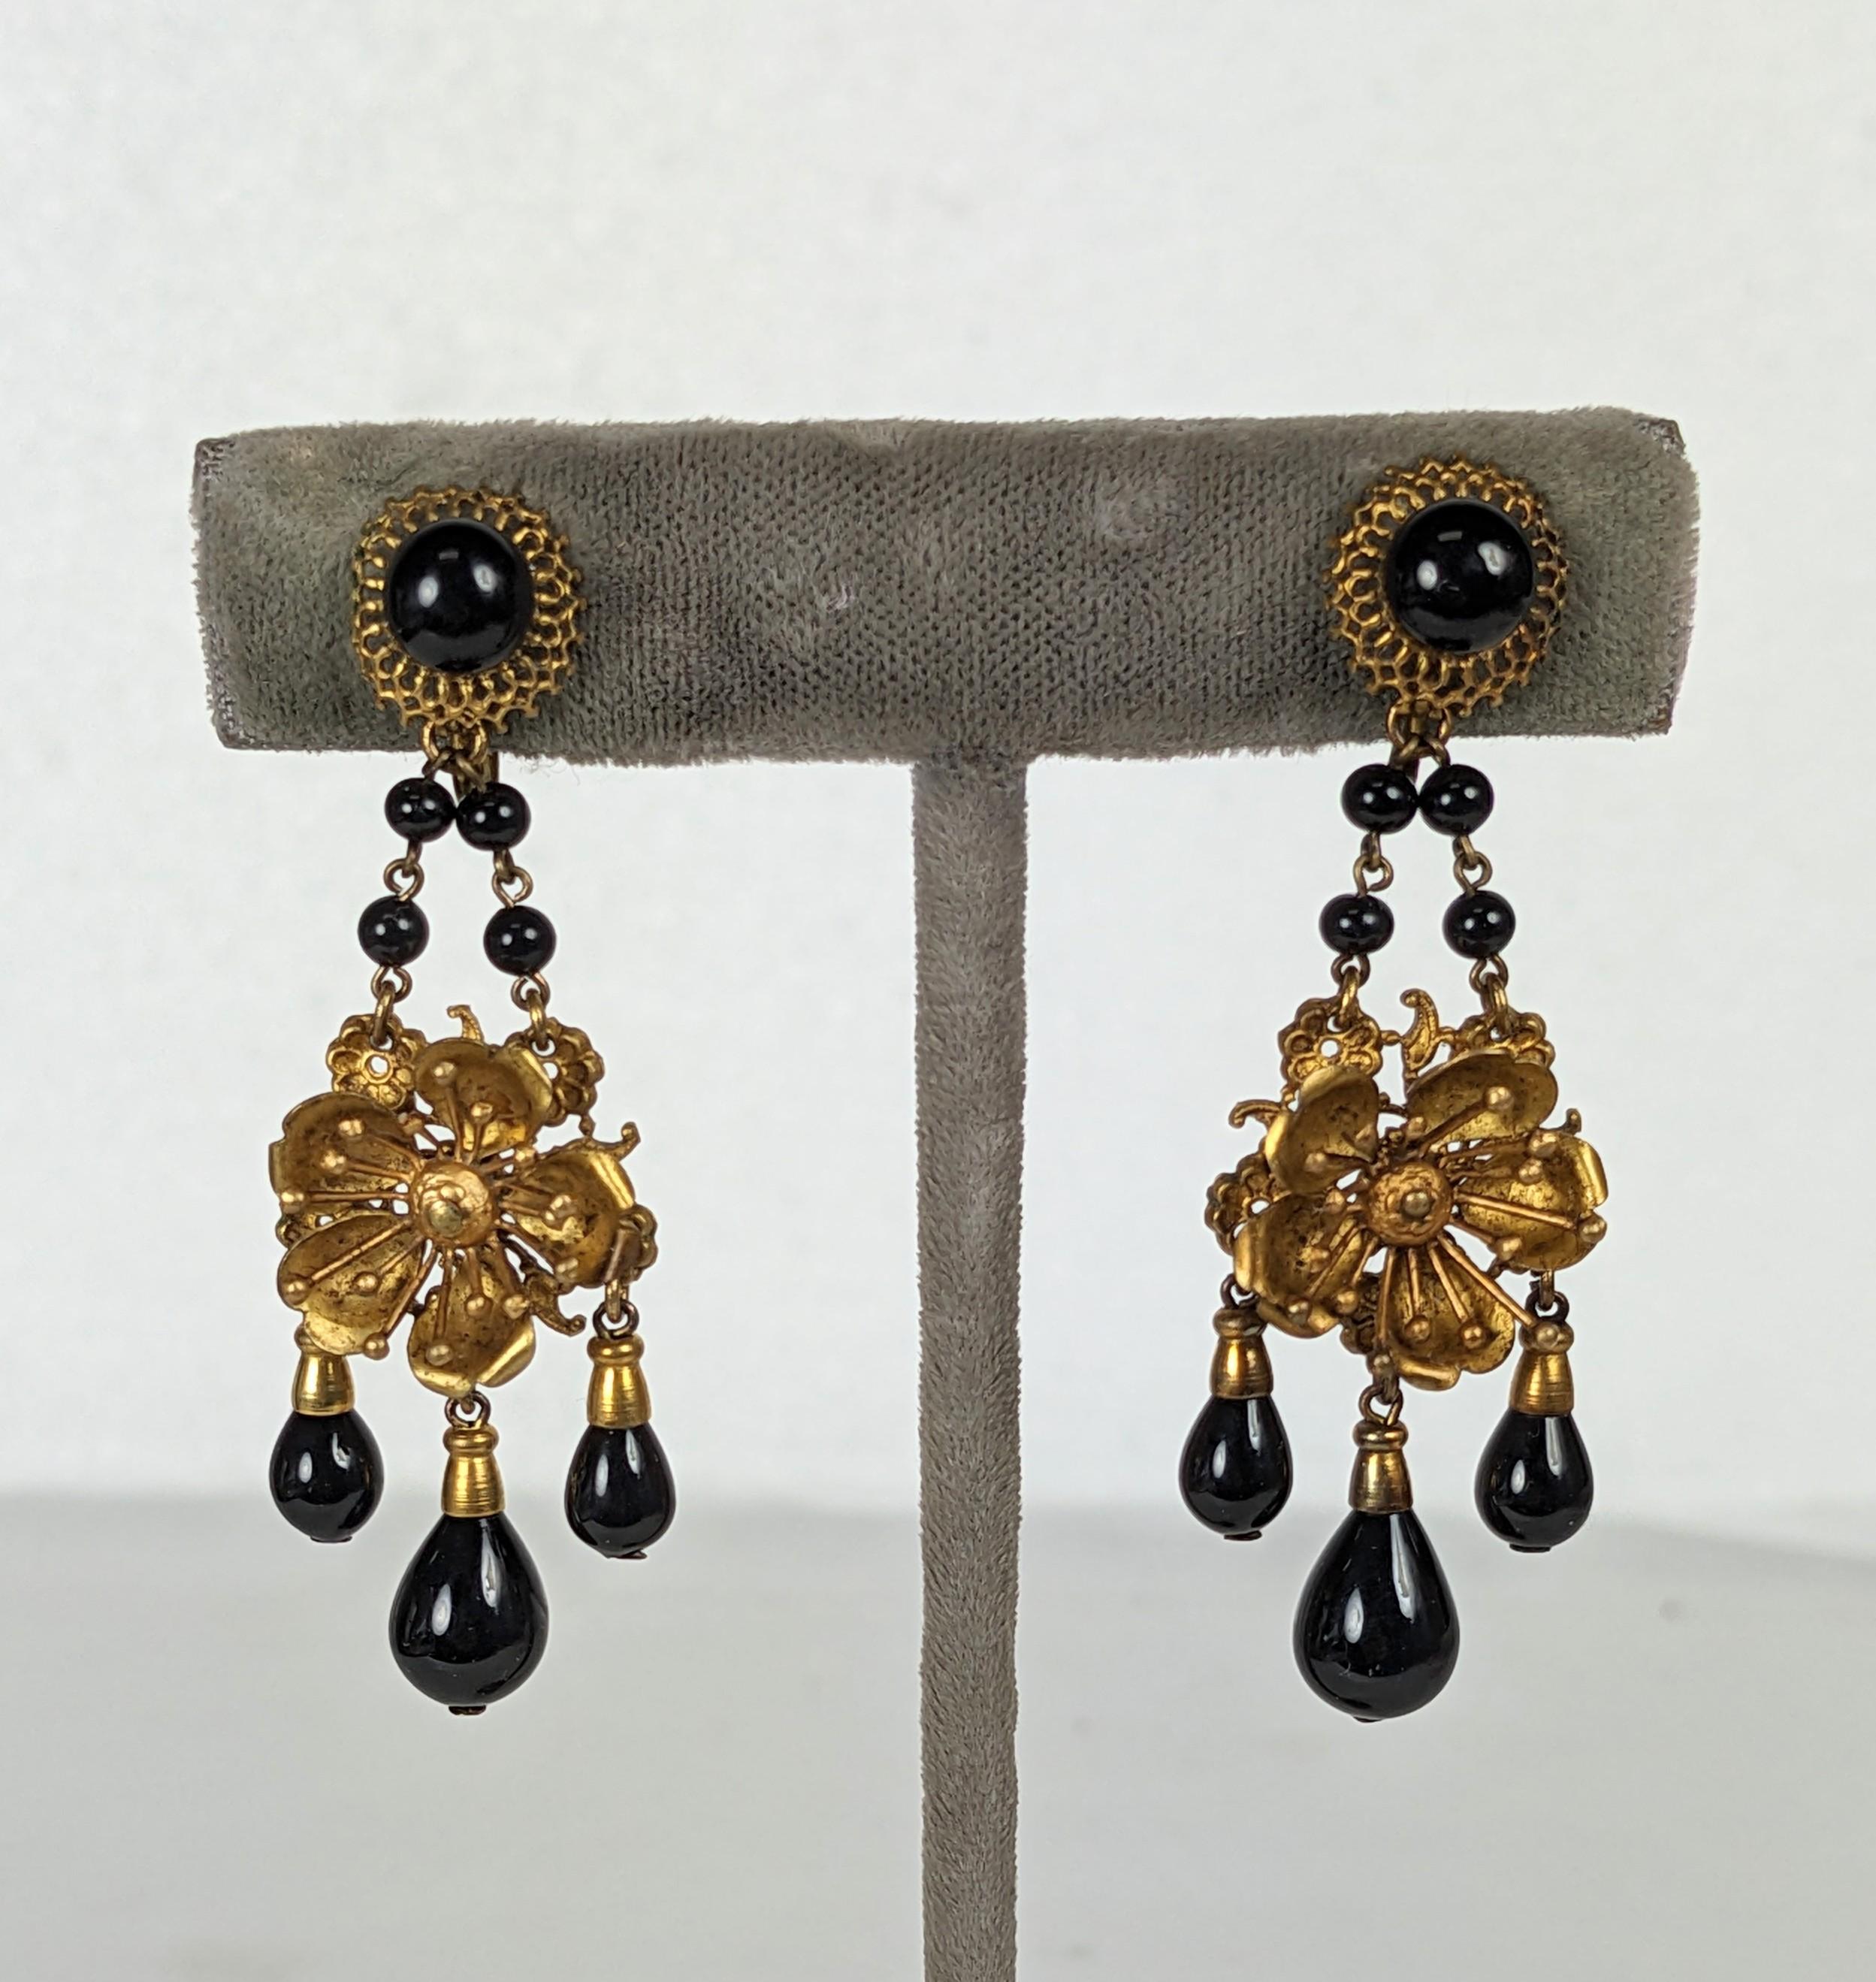 French Japonesque aesthetic movement girandole earrings. Of delicate Japanese three dimensional cherry blossom motifs in gilt metal. Jet pate de verre chain with three suspended pear shape pendant drops. Marked Made in France and  with additional